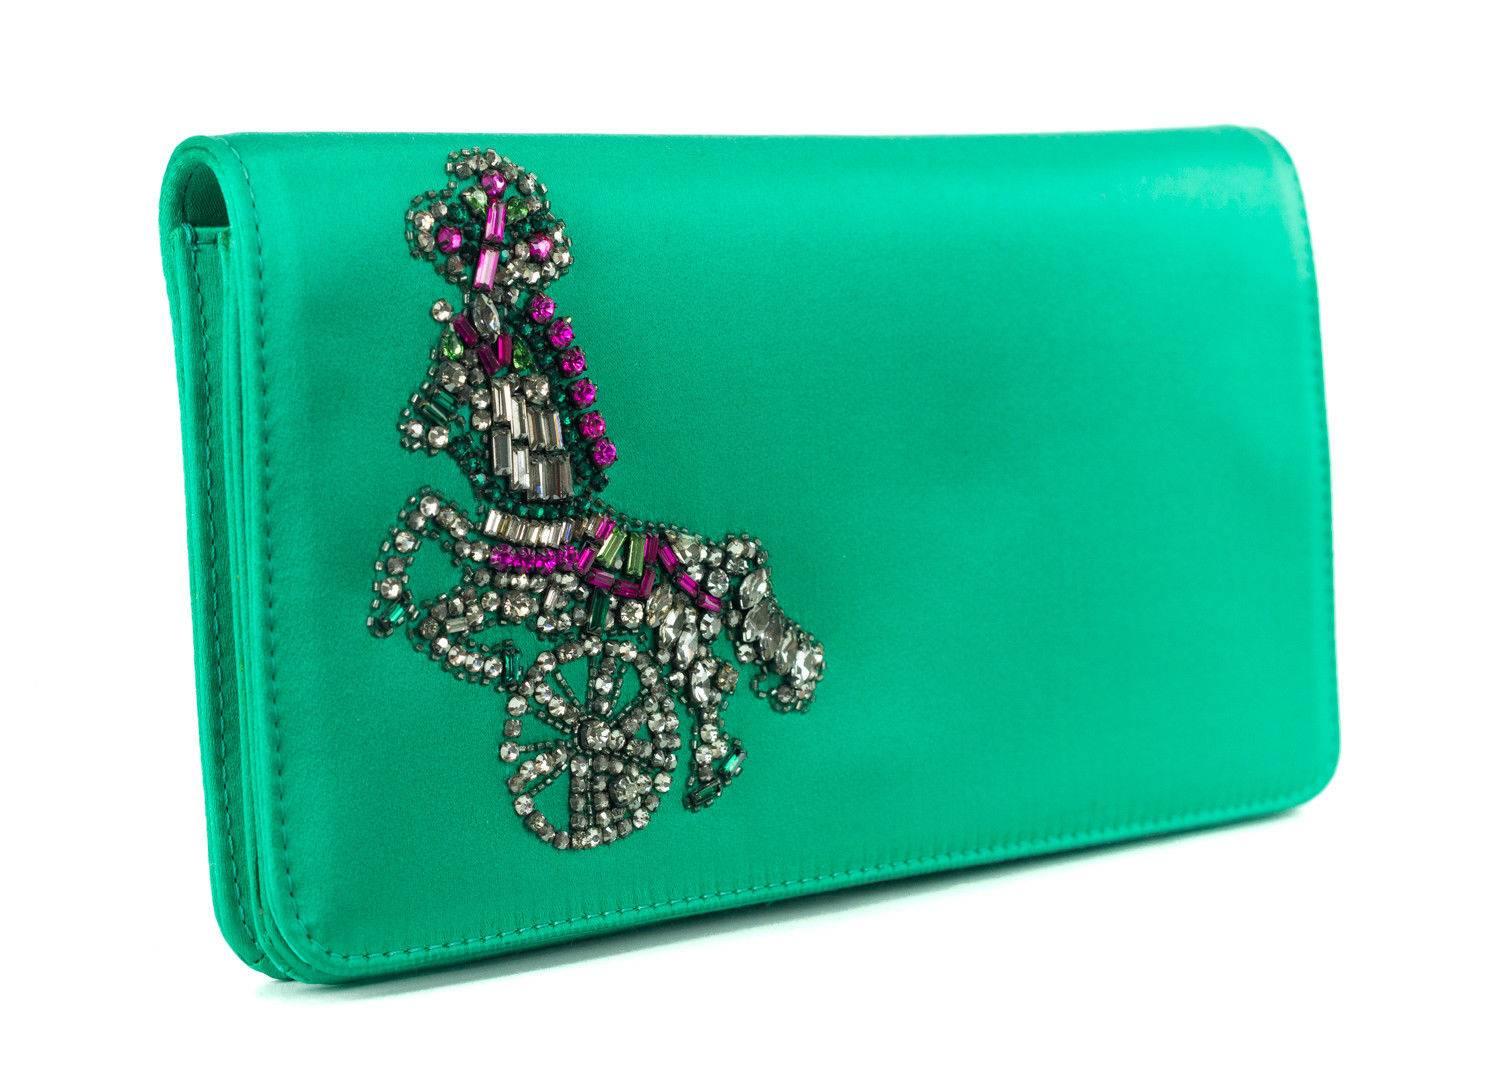 Roberto Cavalli Solid Green Satin Embellished Embroidered Clutch For Sale 1